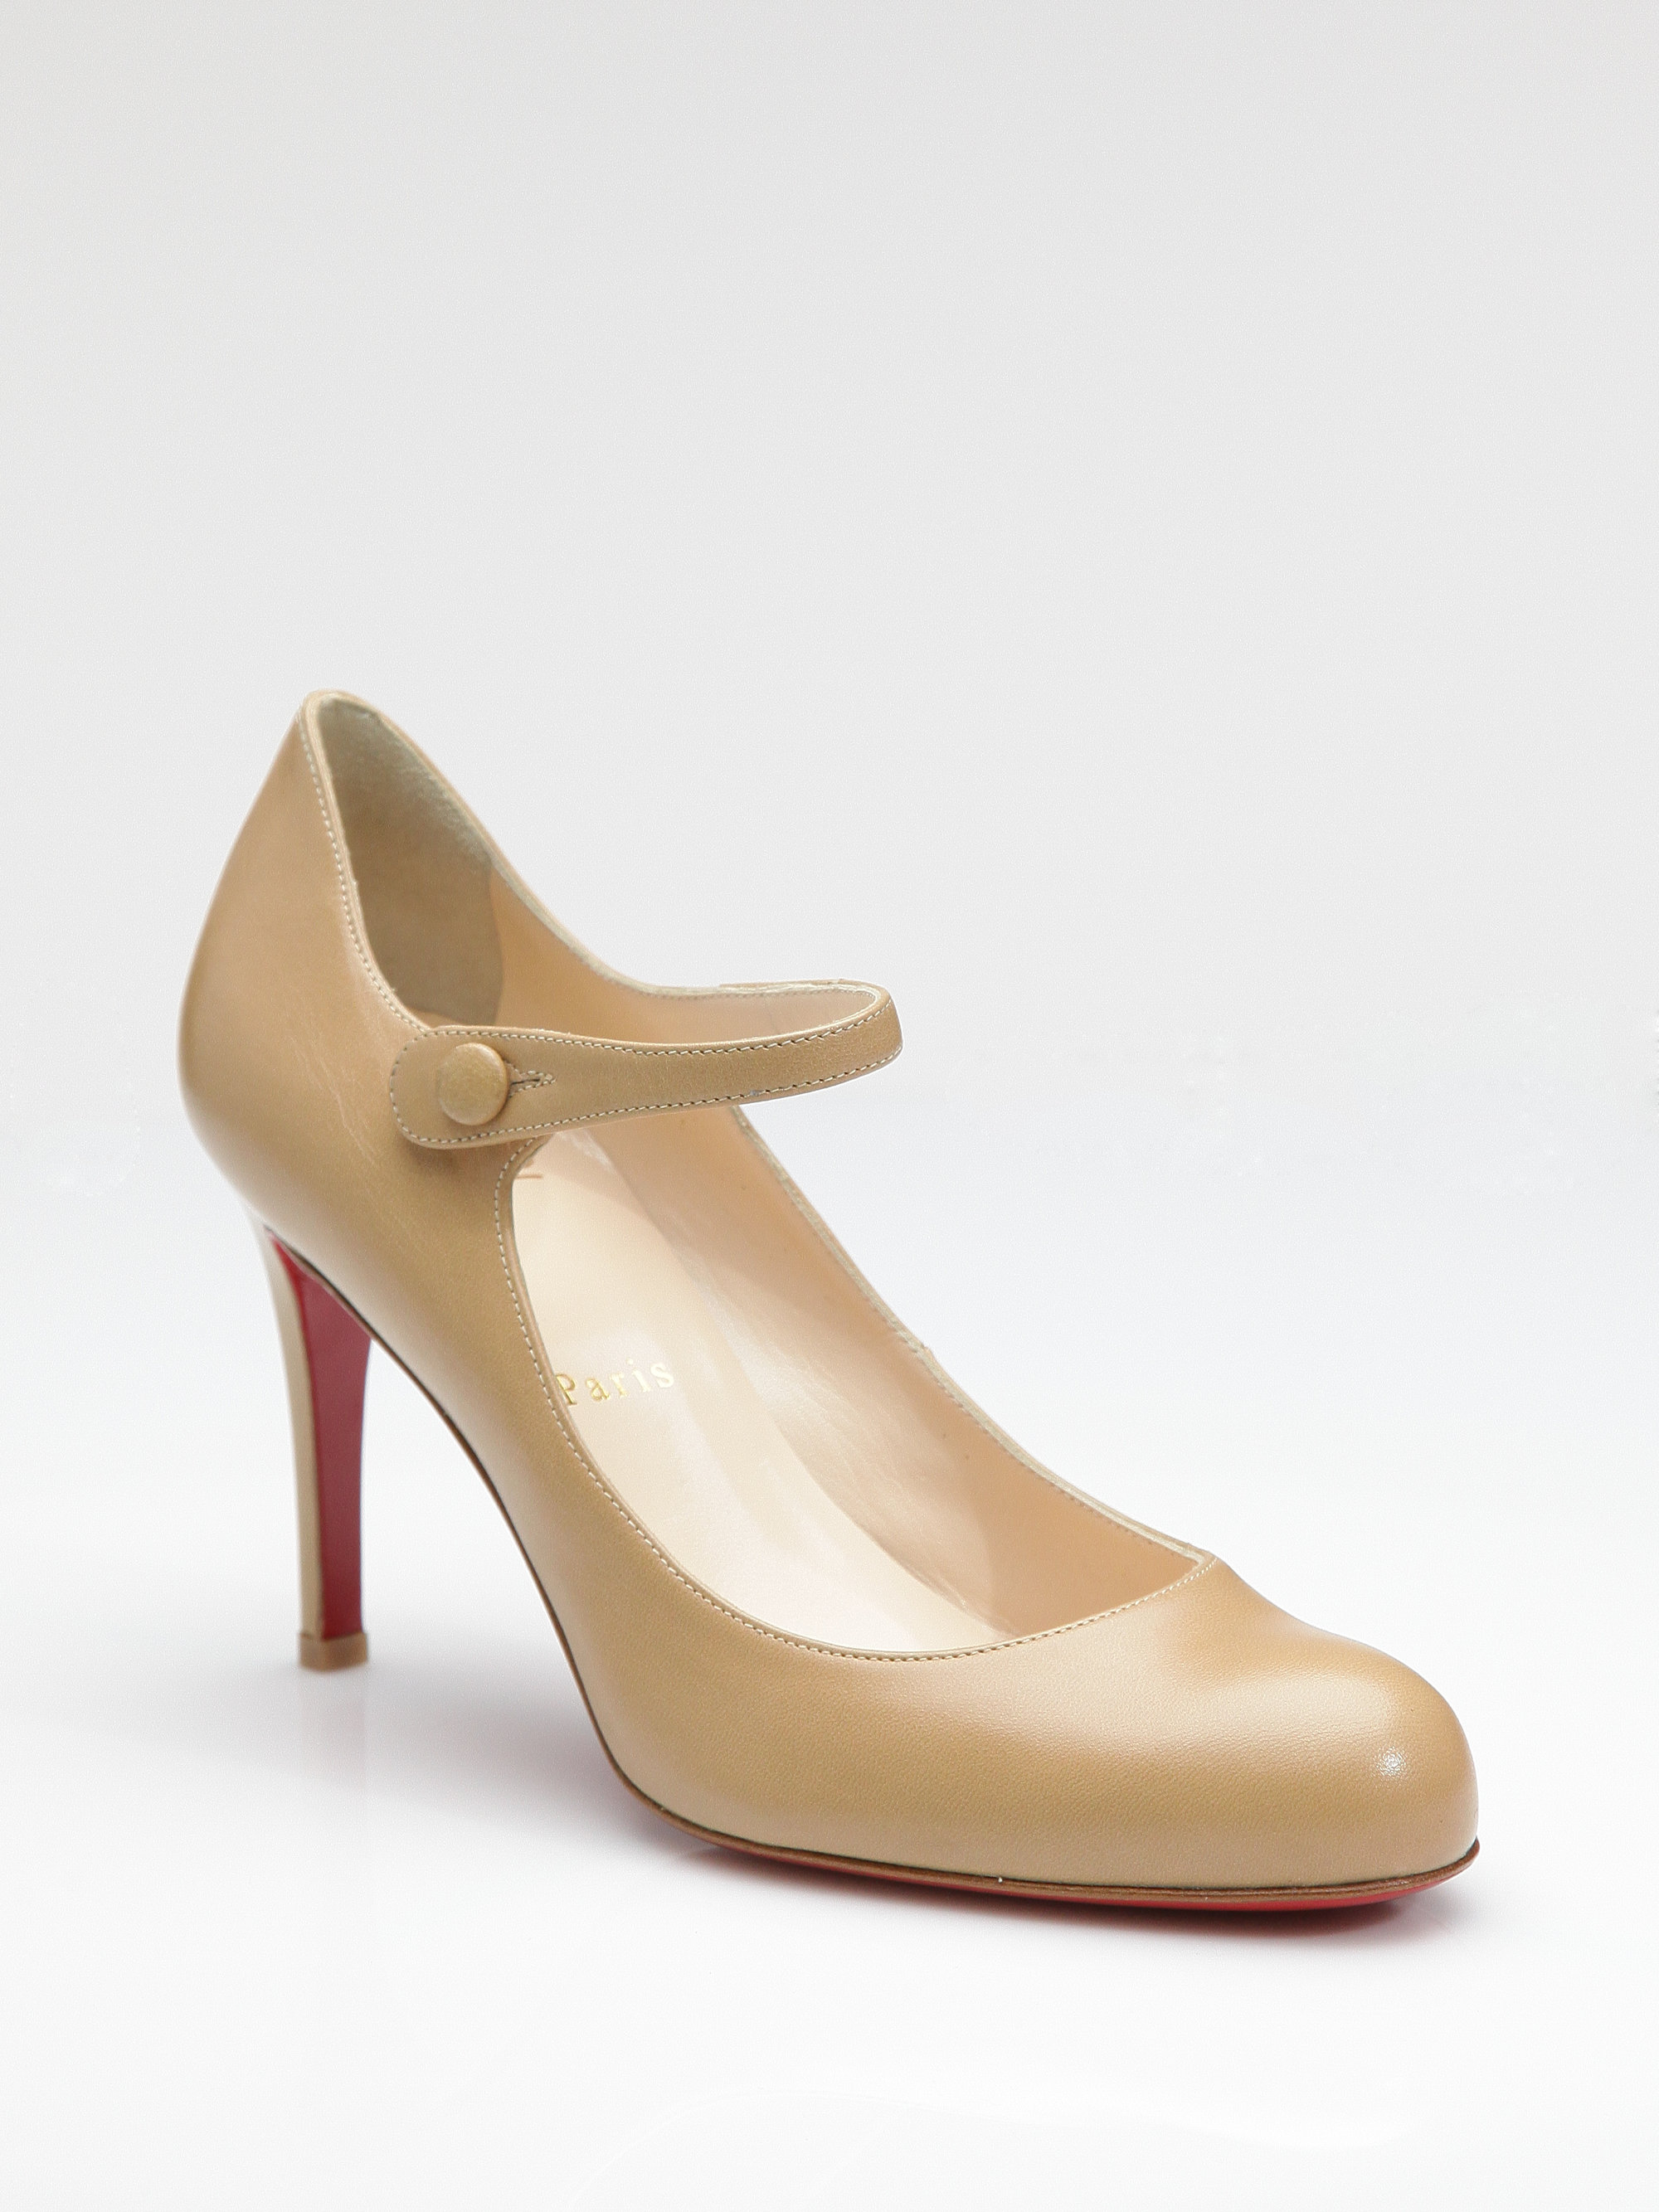 Christian Louboutin Corto Mary Jane Pumps in Beige (Natural) - Lyst